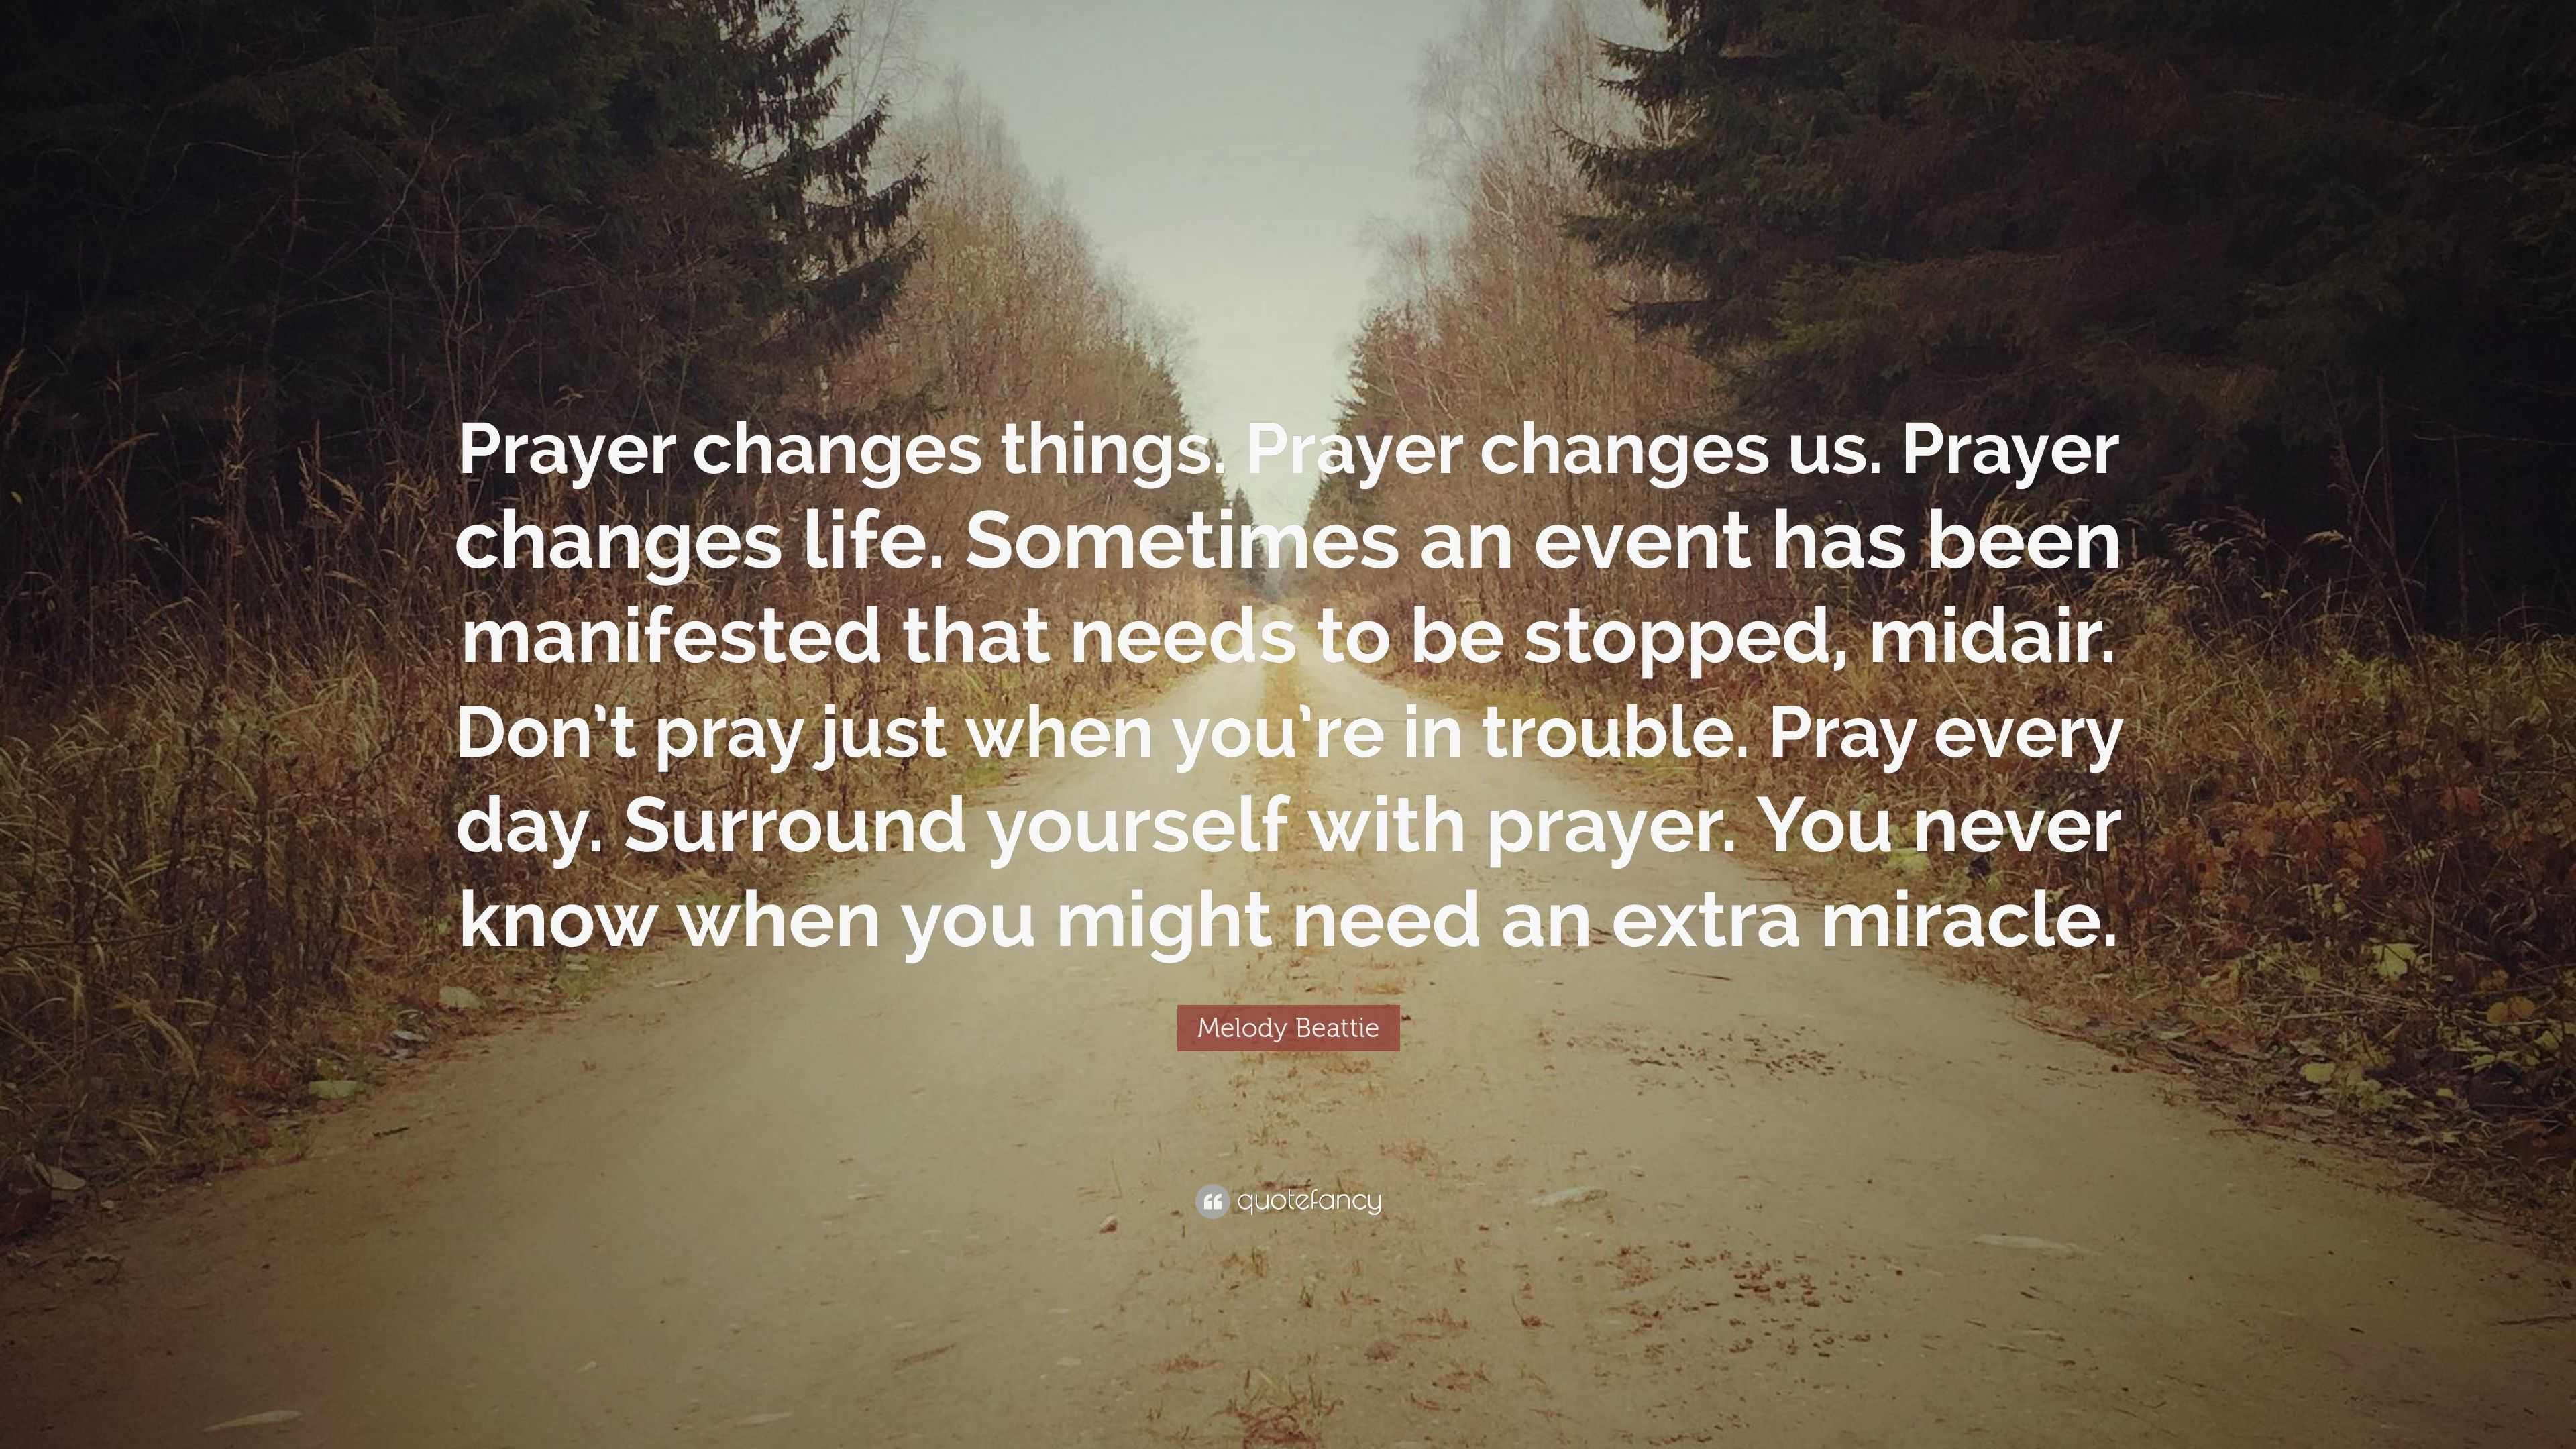 Melody Beattie Quote: “Prayer changes things. Prayer changes us. Prayer